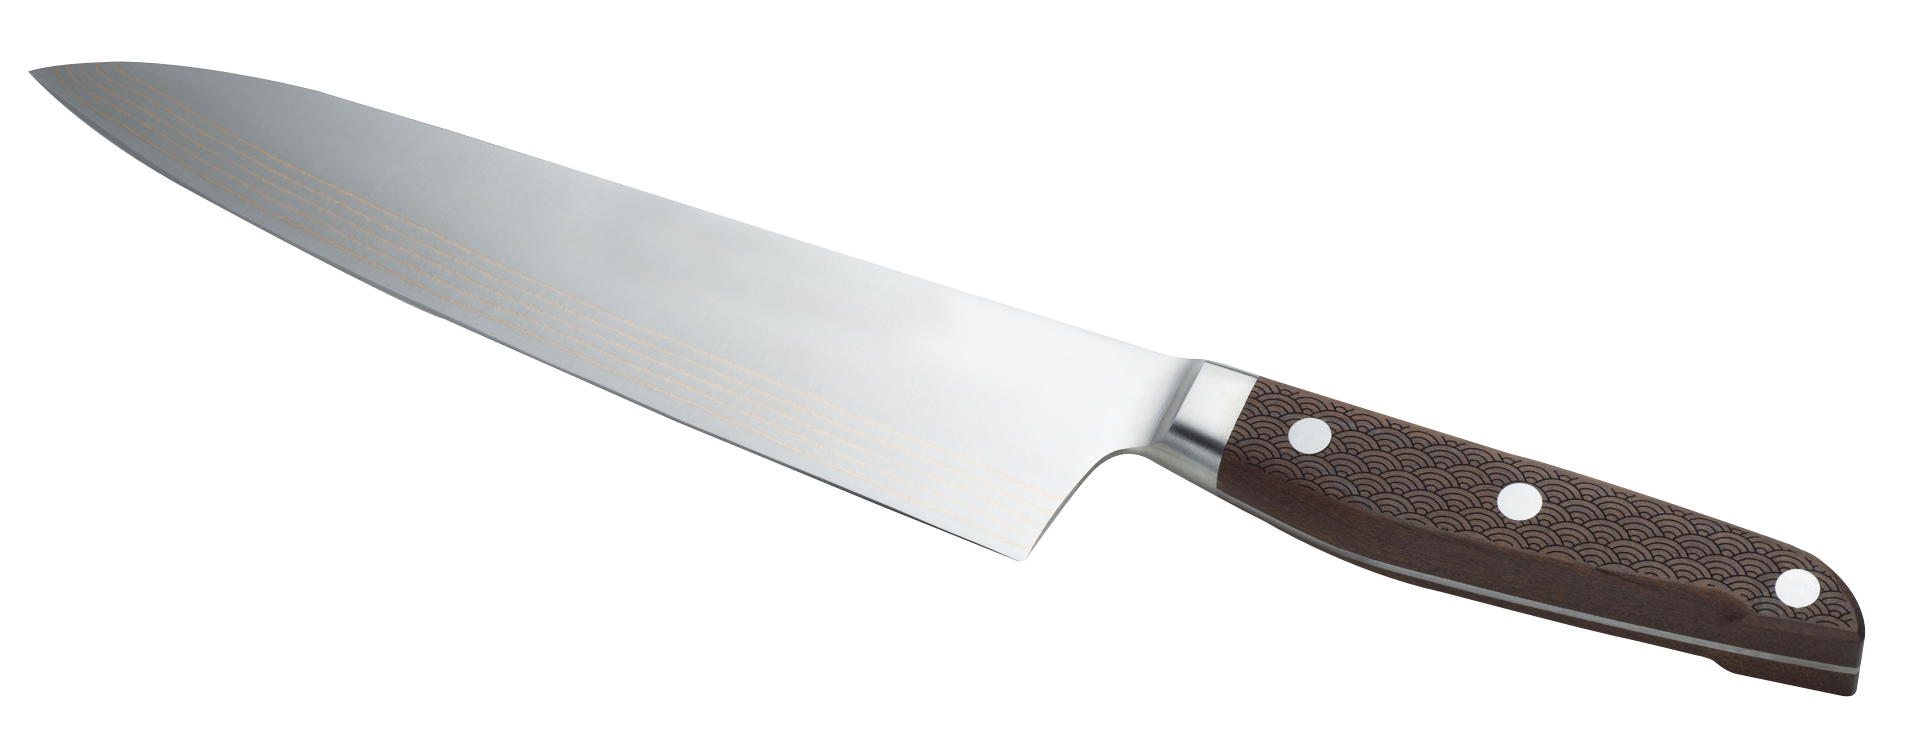 Knife PNG - 7758